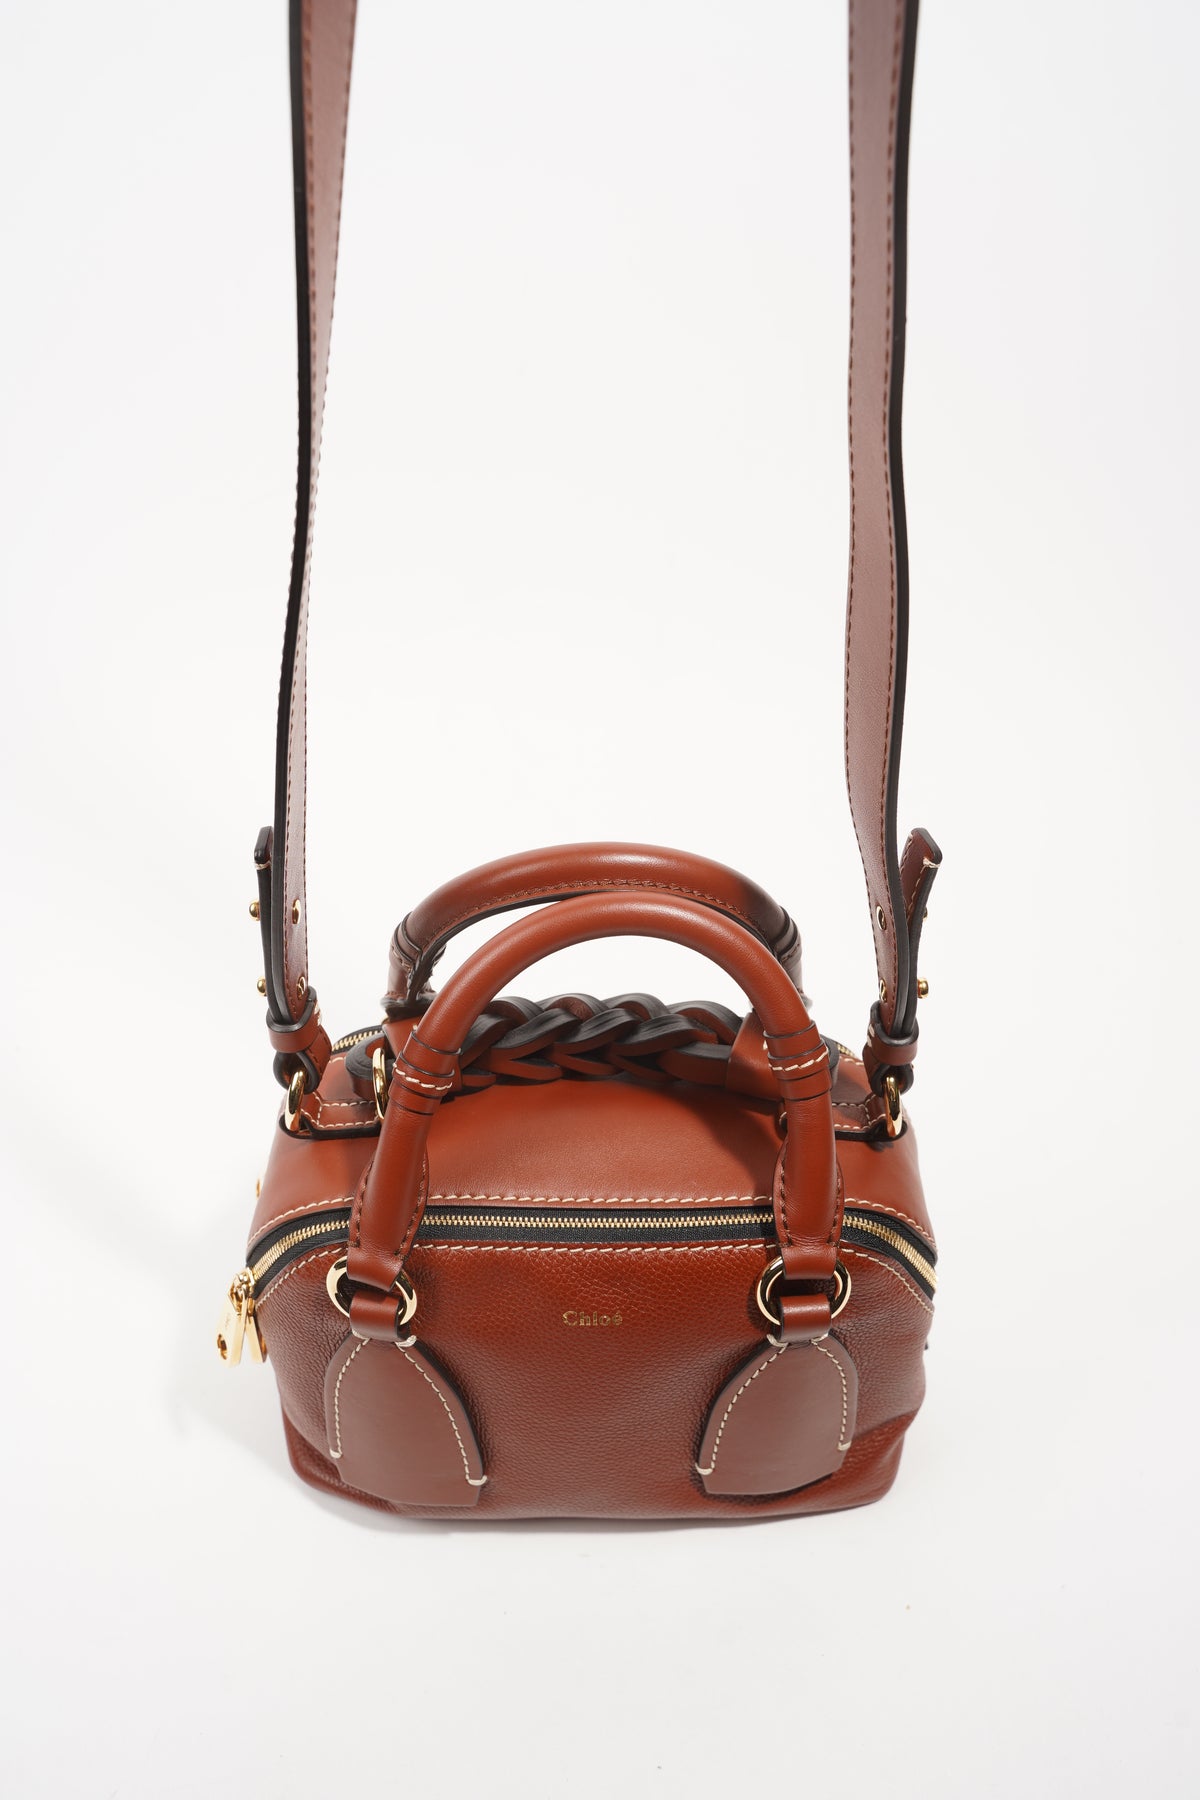 The cute Chloé Daria Small bag is on top of my Wish List